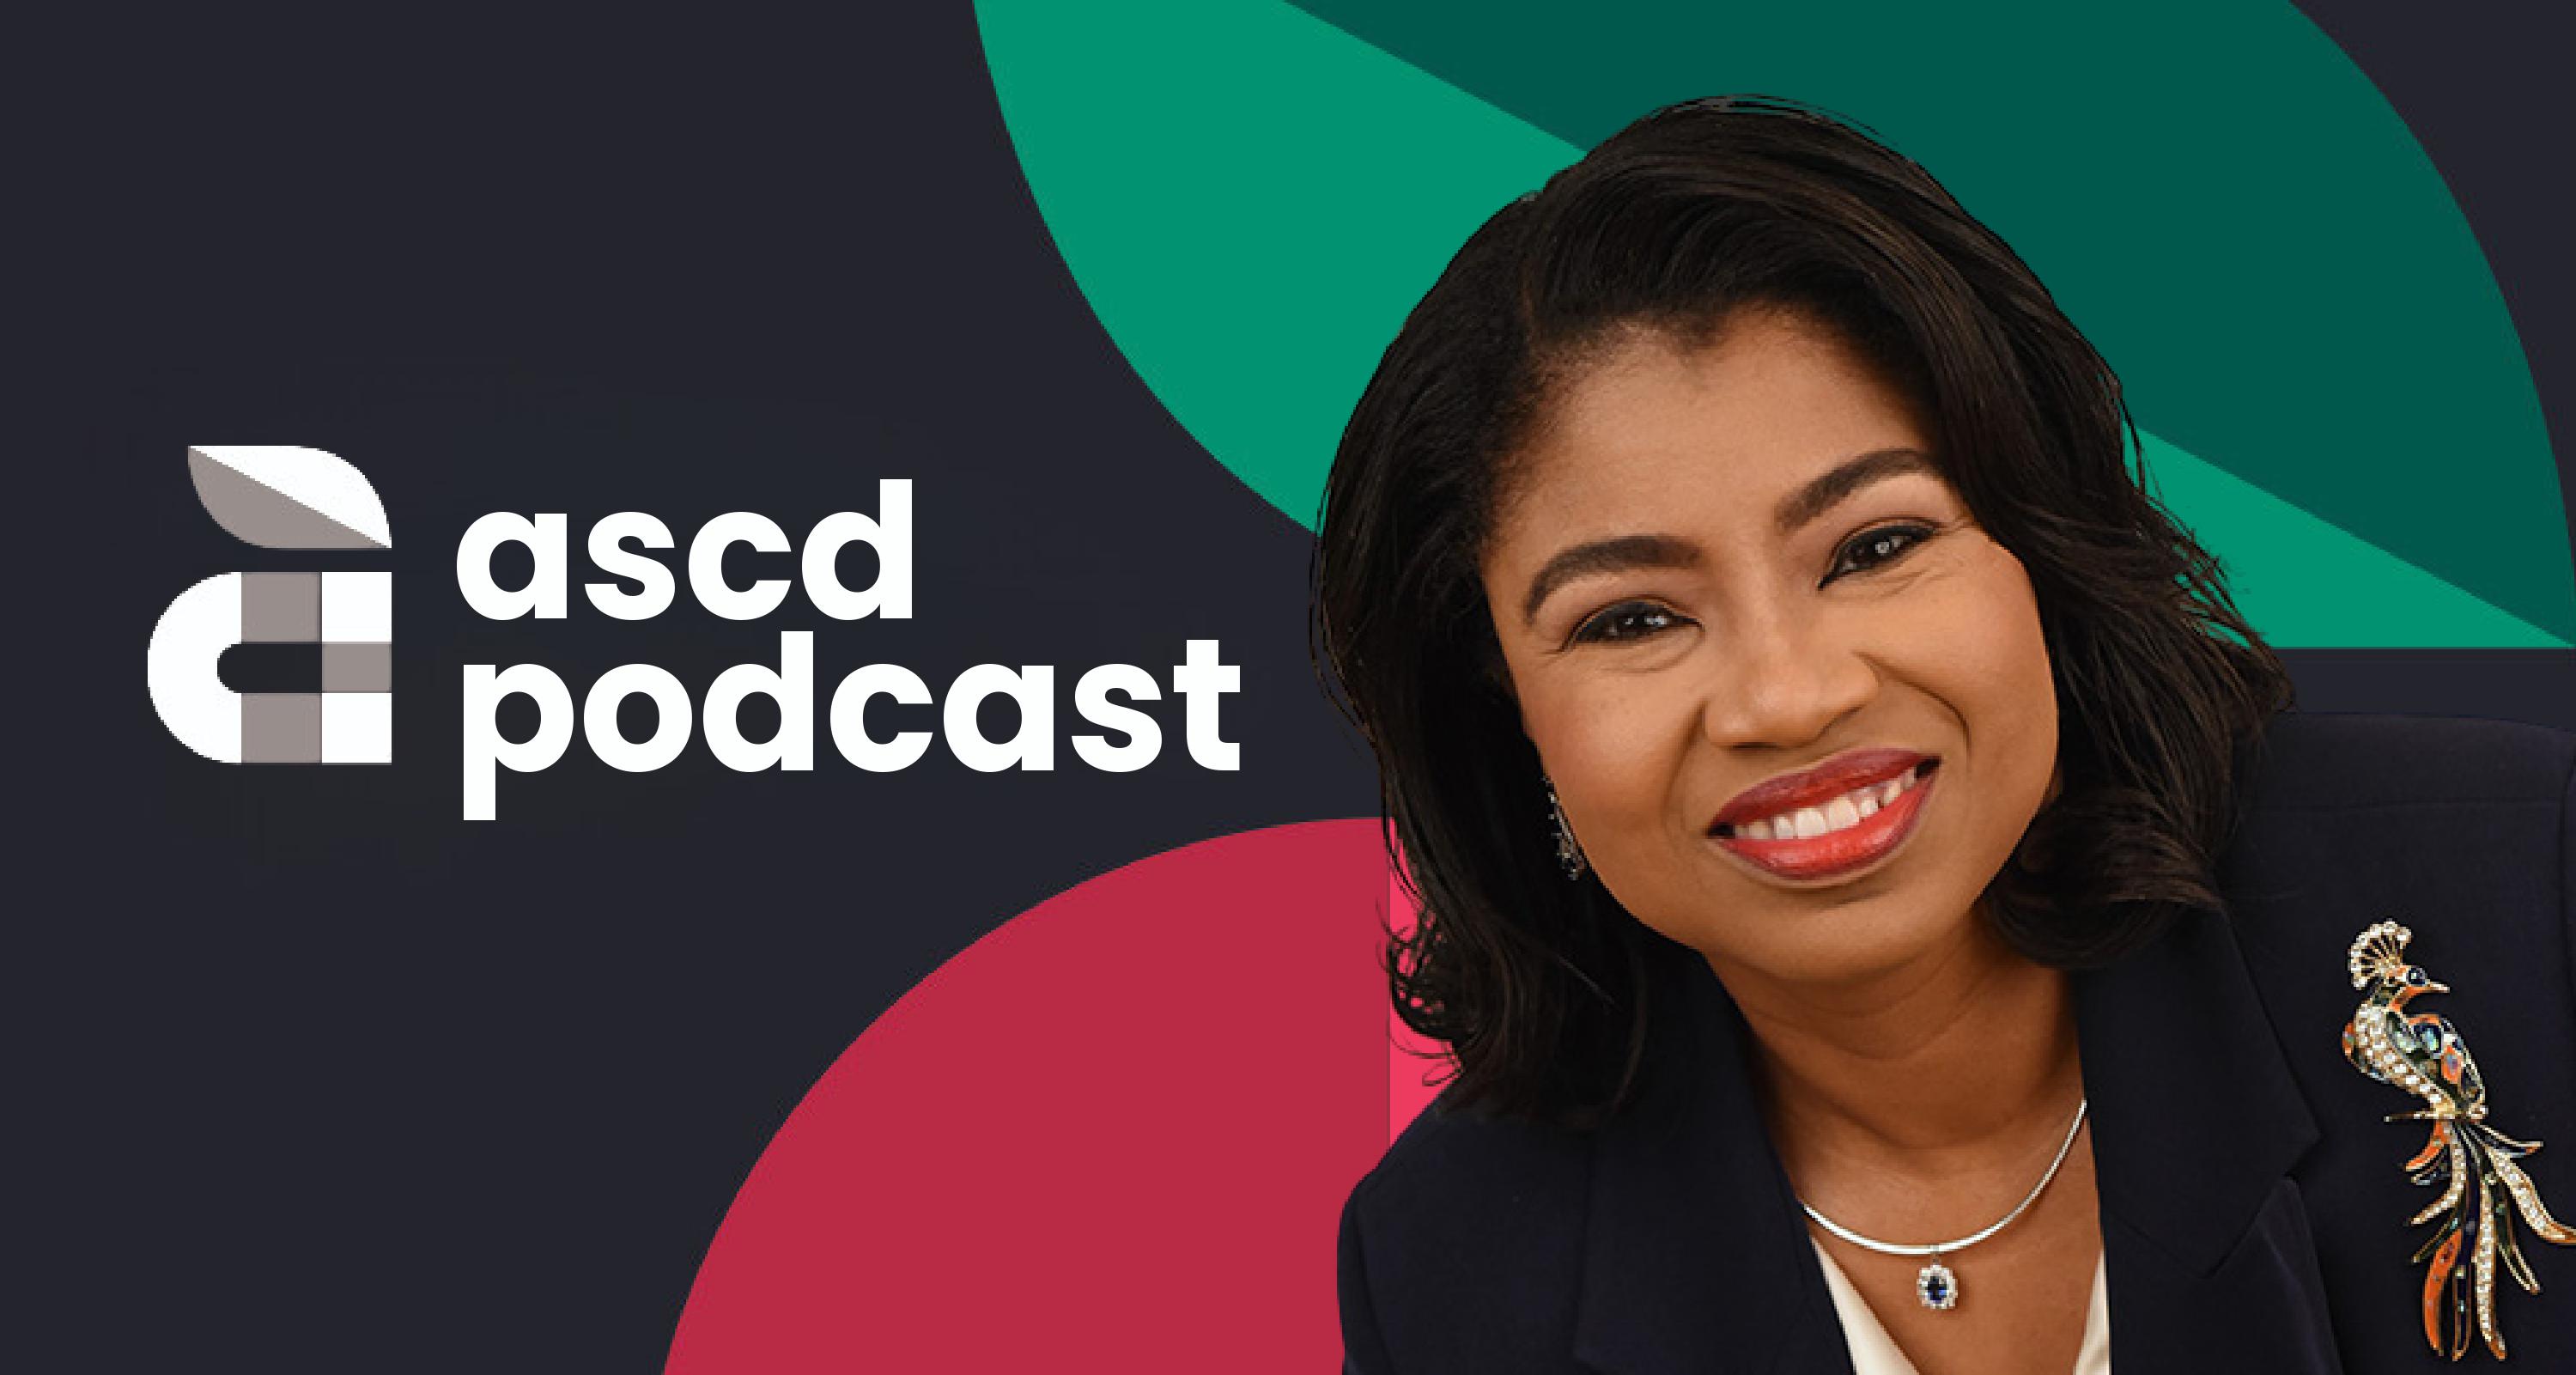 Image of podcast interviewee Teresa Hill against a dark grey background with ASCD's apple logo and the text "ASCD Podcast"